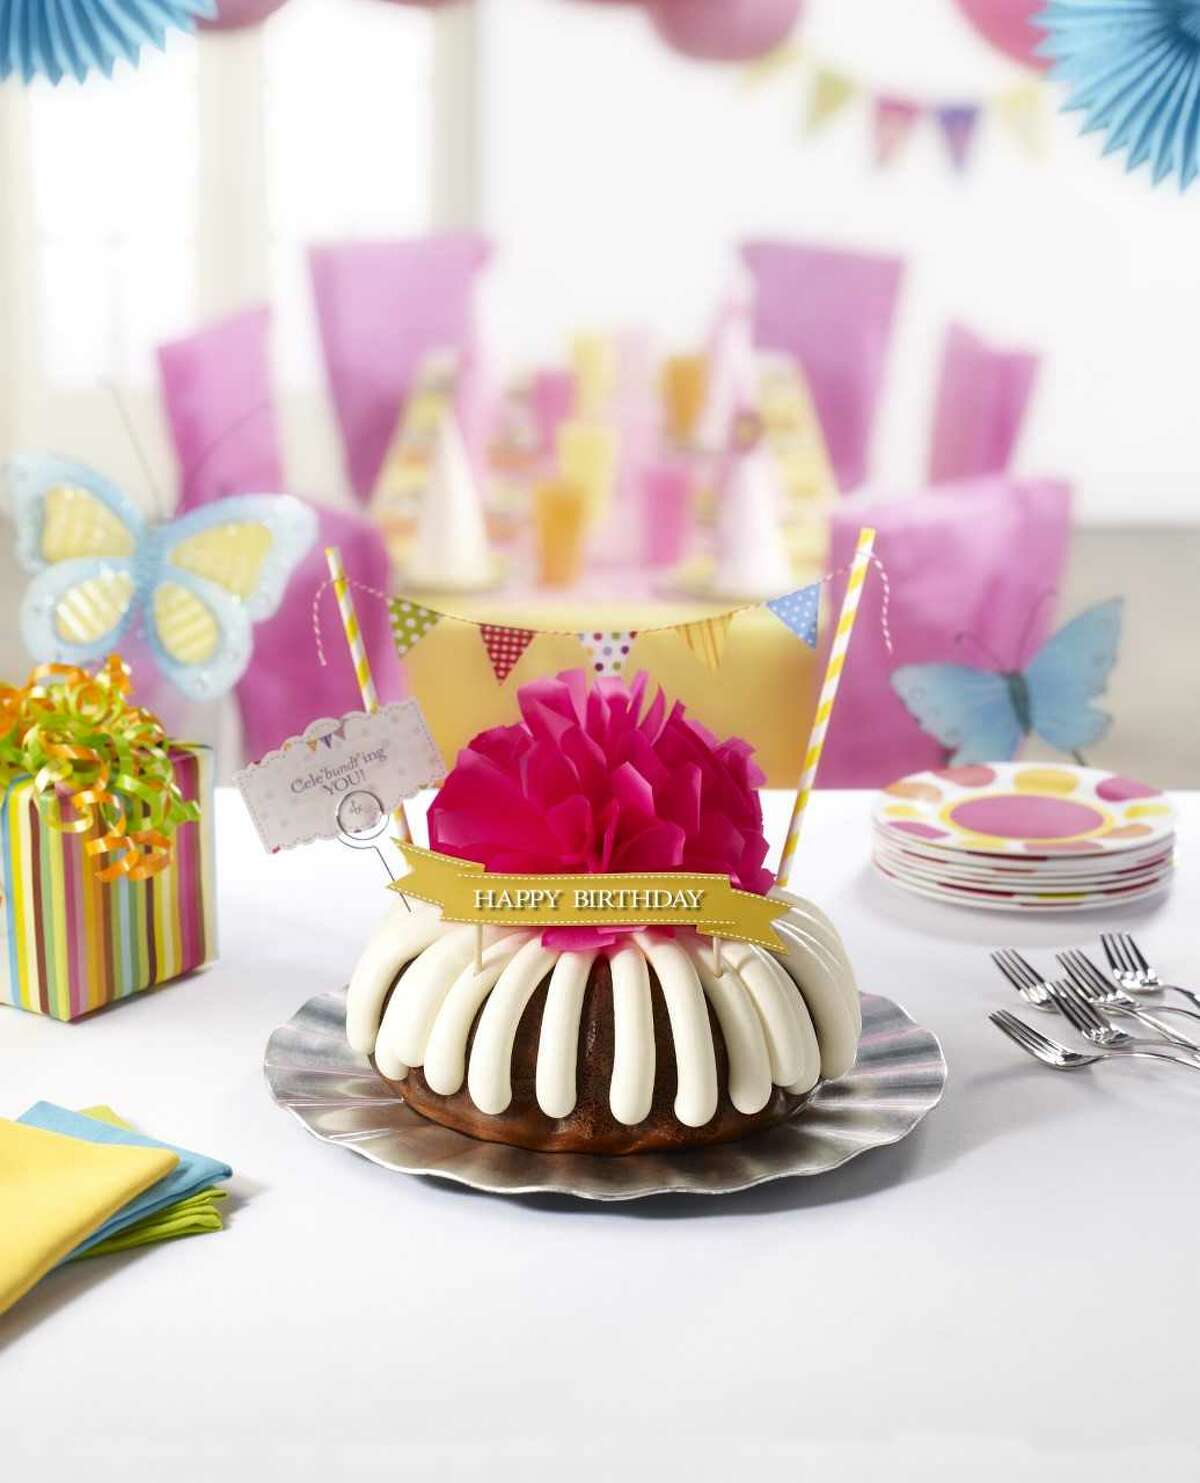 Nothing Bundt Cakes overs 25 hand-crafted birthday designs and nine flavors to choose from.